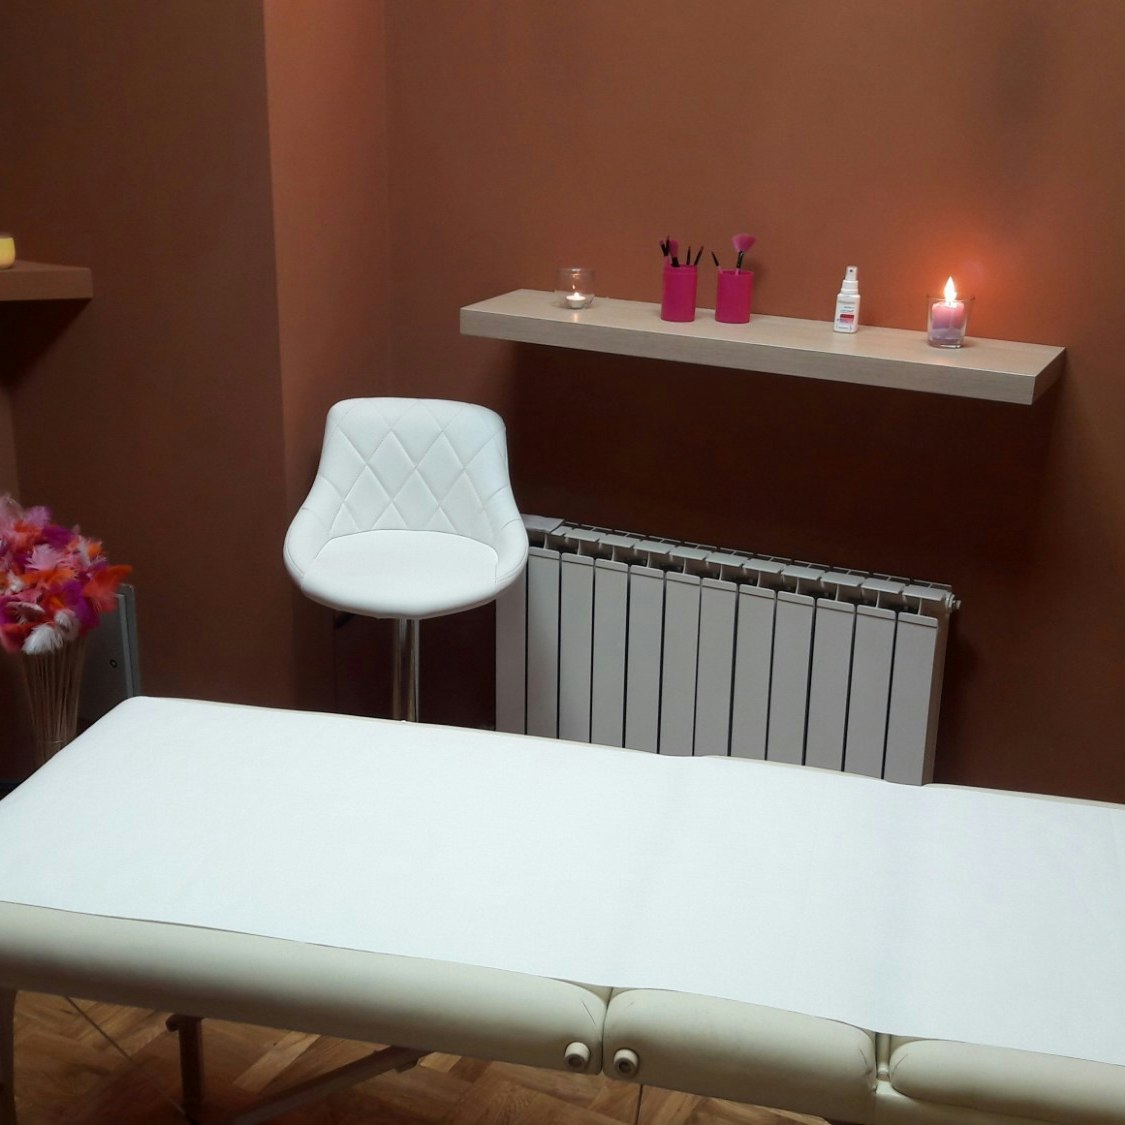 A massage table in a candlelit room.